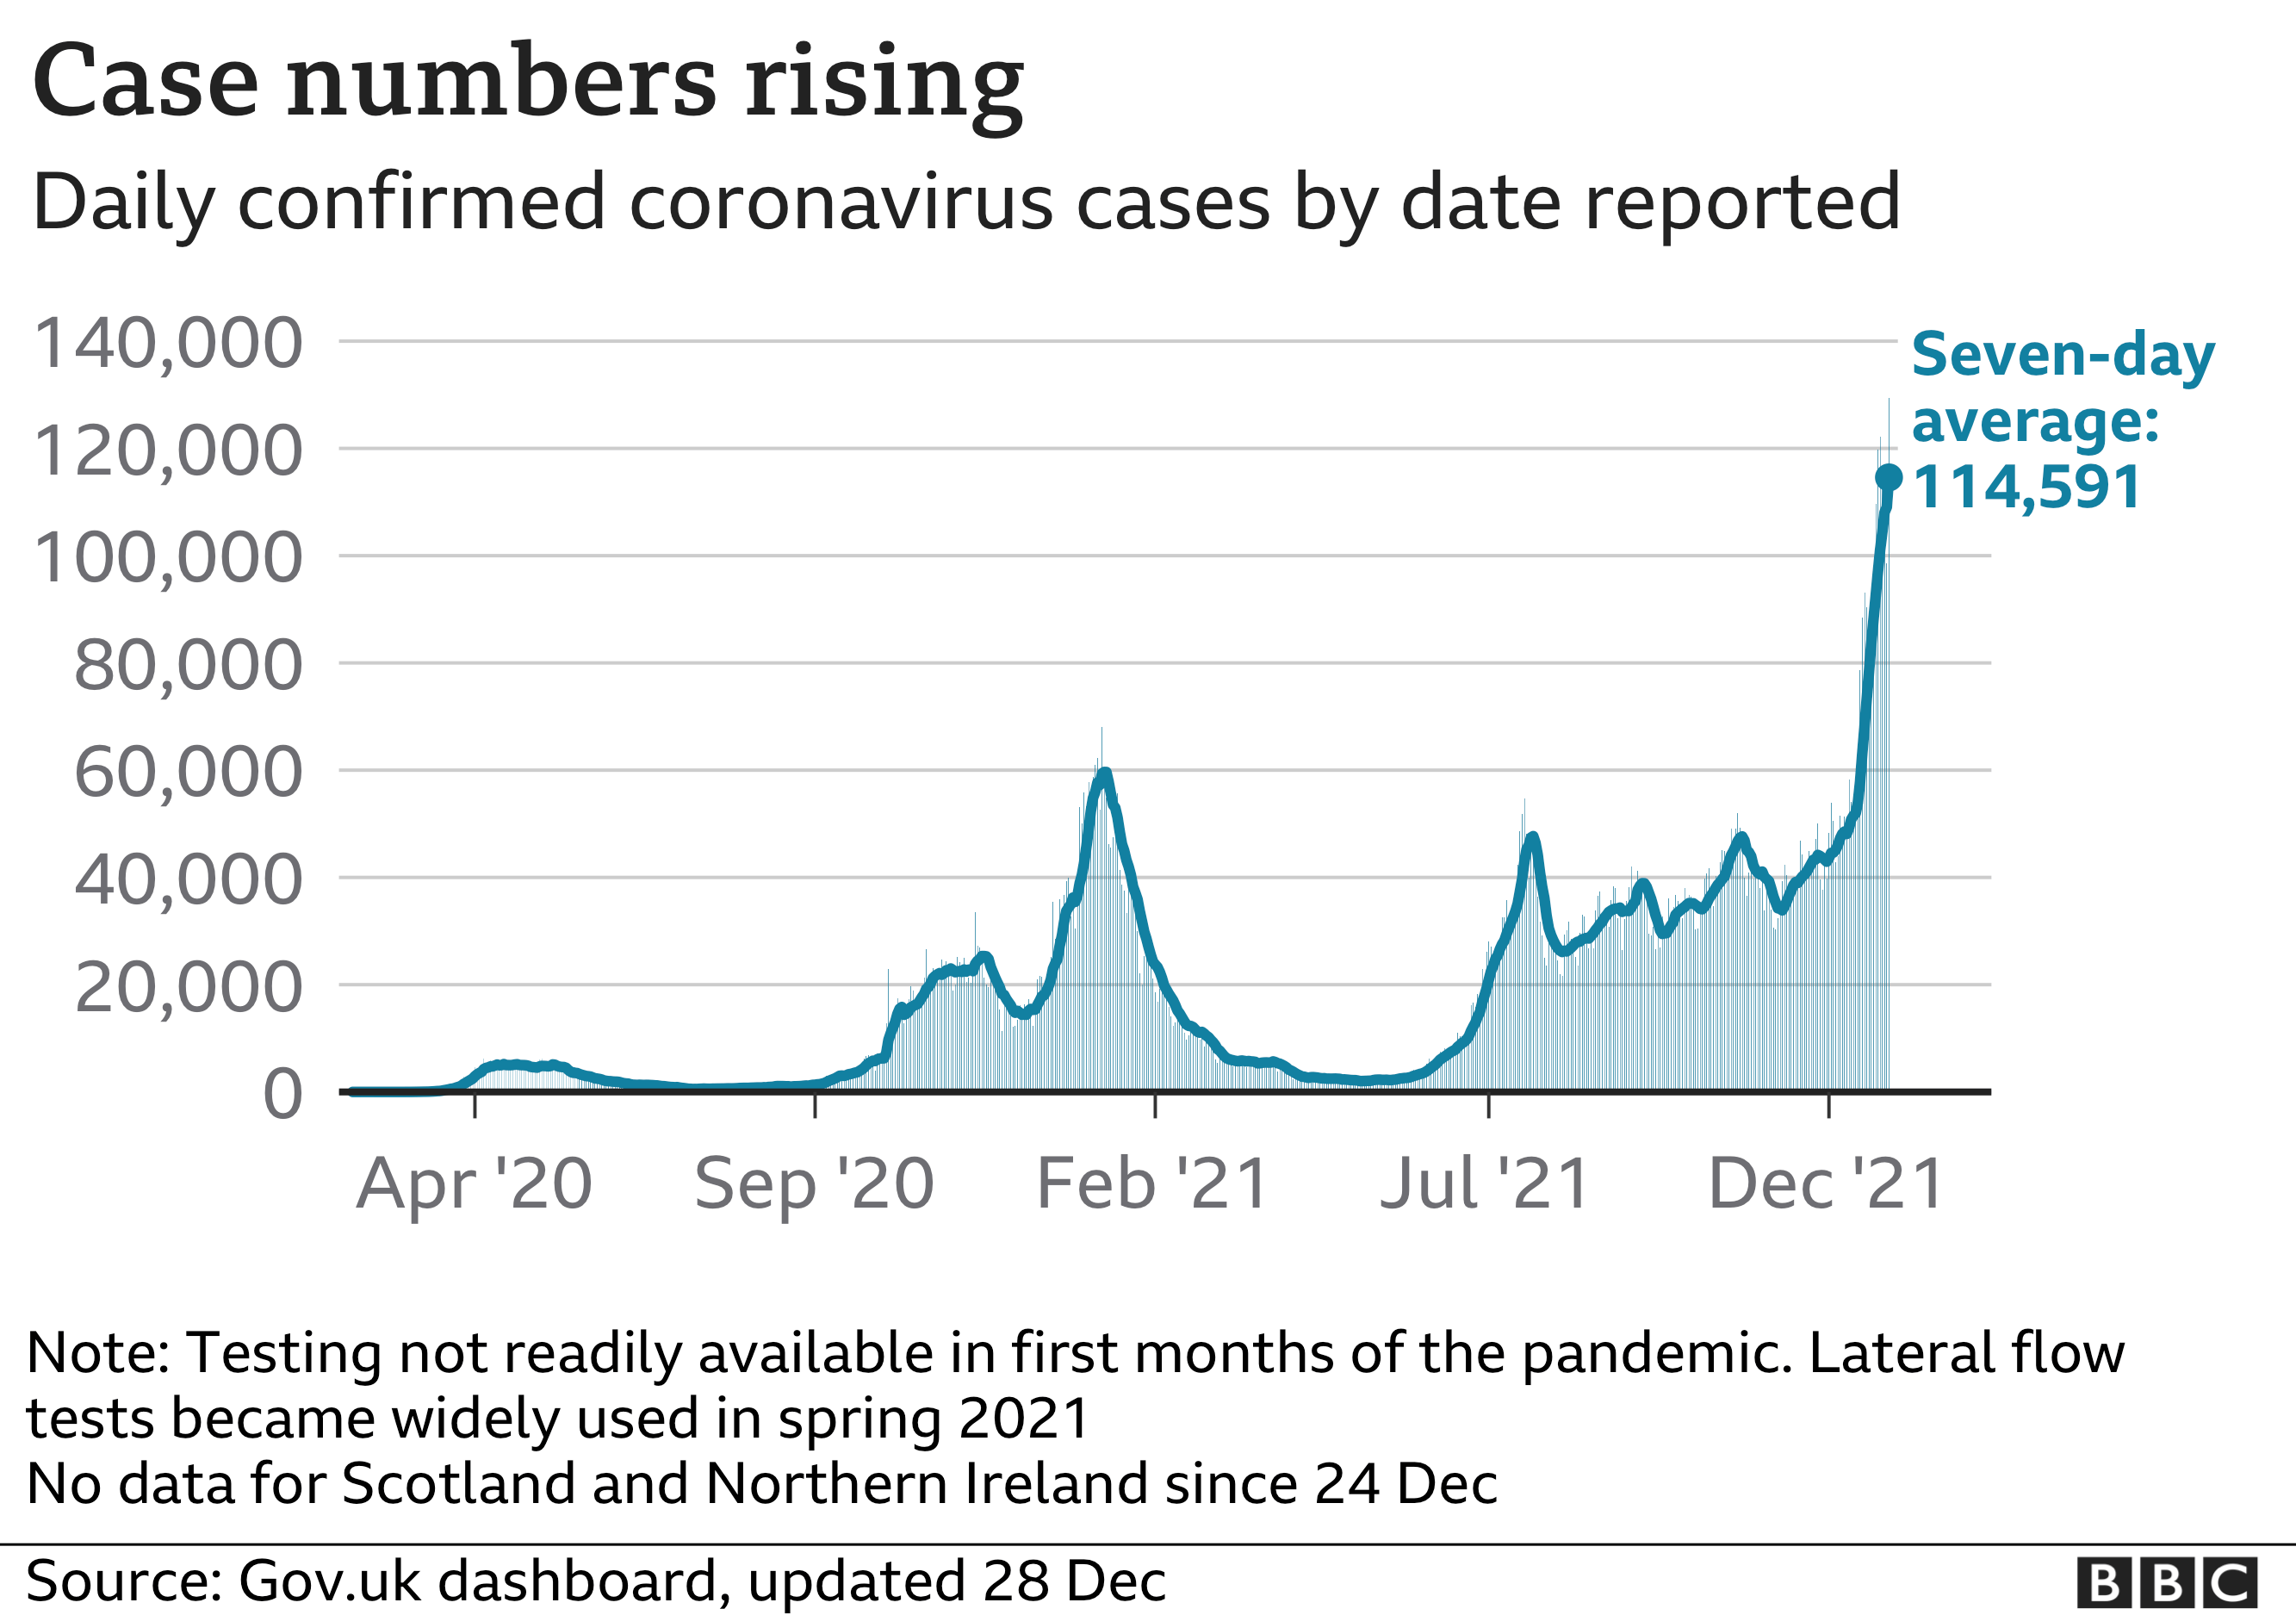 Chart showing that the number of daily cases is rising rapidly in the UK. Updated 28 DEC